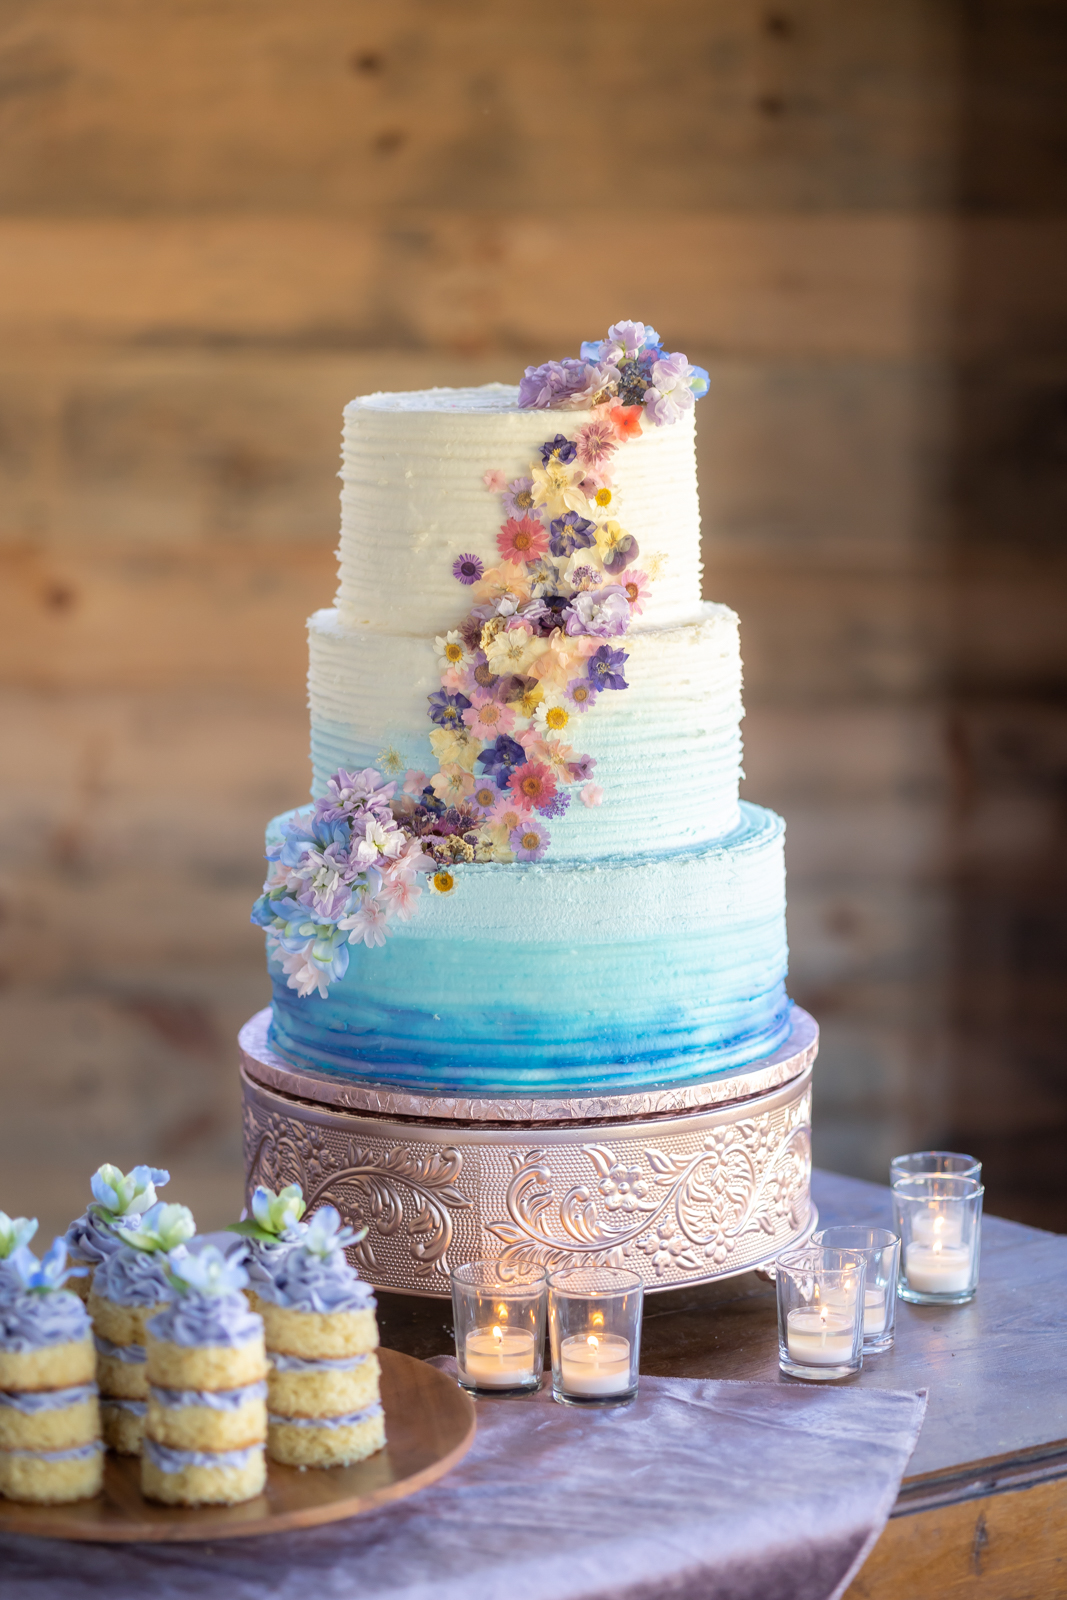 Ombre Wedding Cake With Pressed Floral